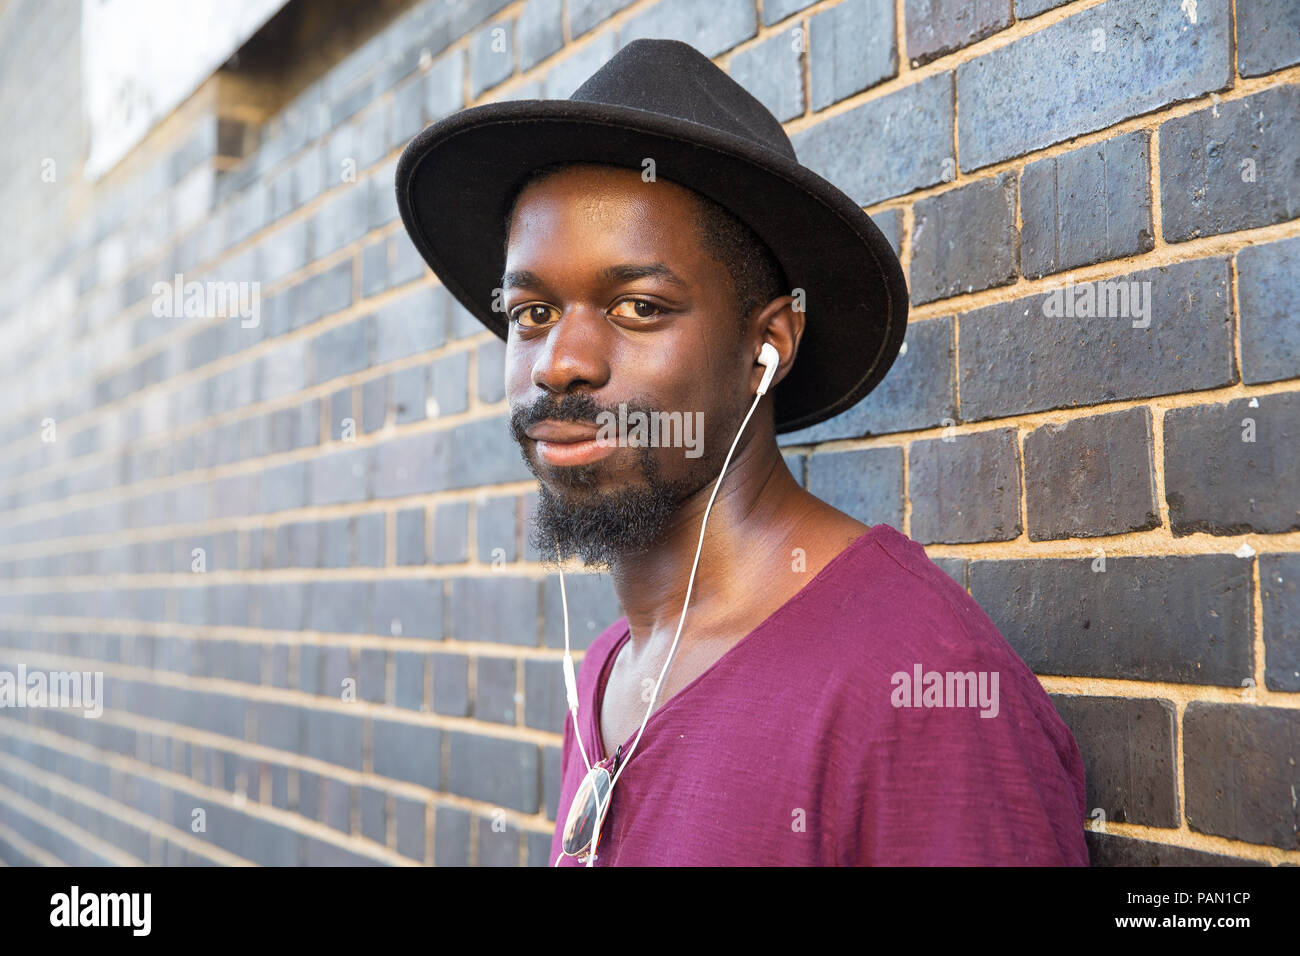 A cool Hipster, black man wearing a wide brimmed hat, purple t-shirt and ear phones, leaning against a wall in Brick Lane, Shoreditch, London. Stock Photo